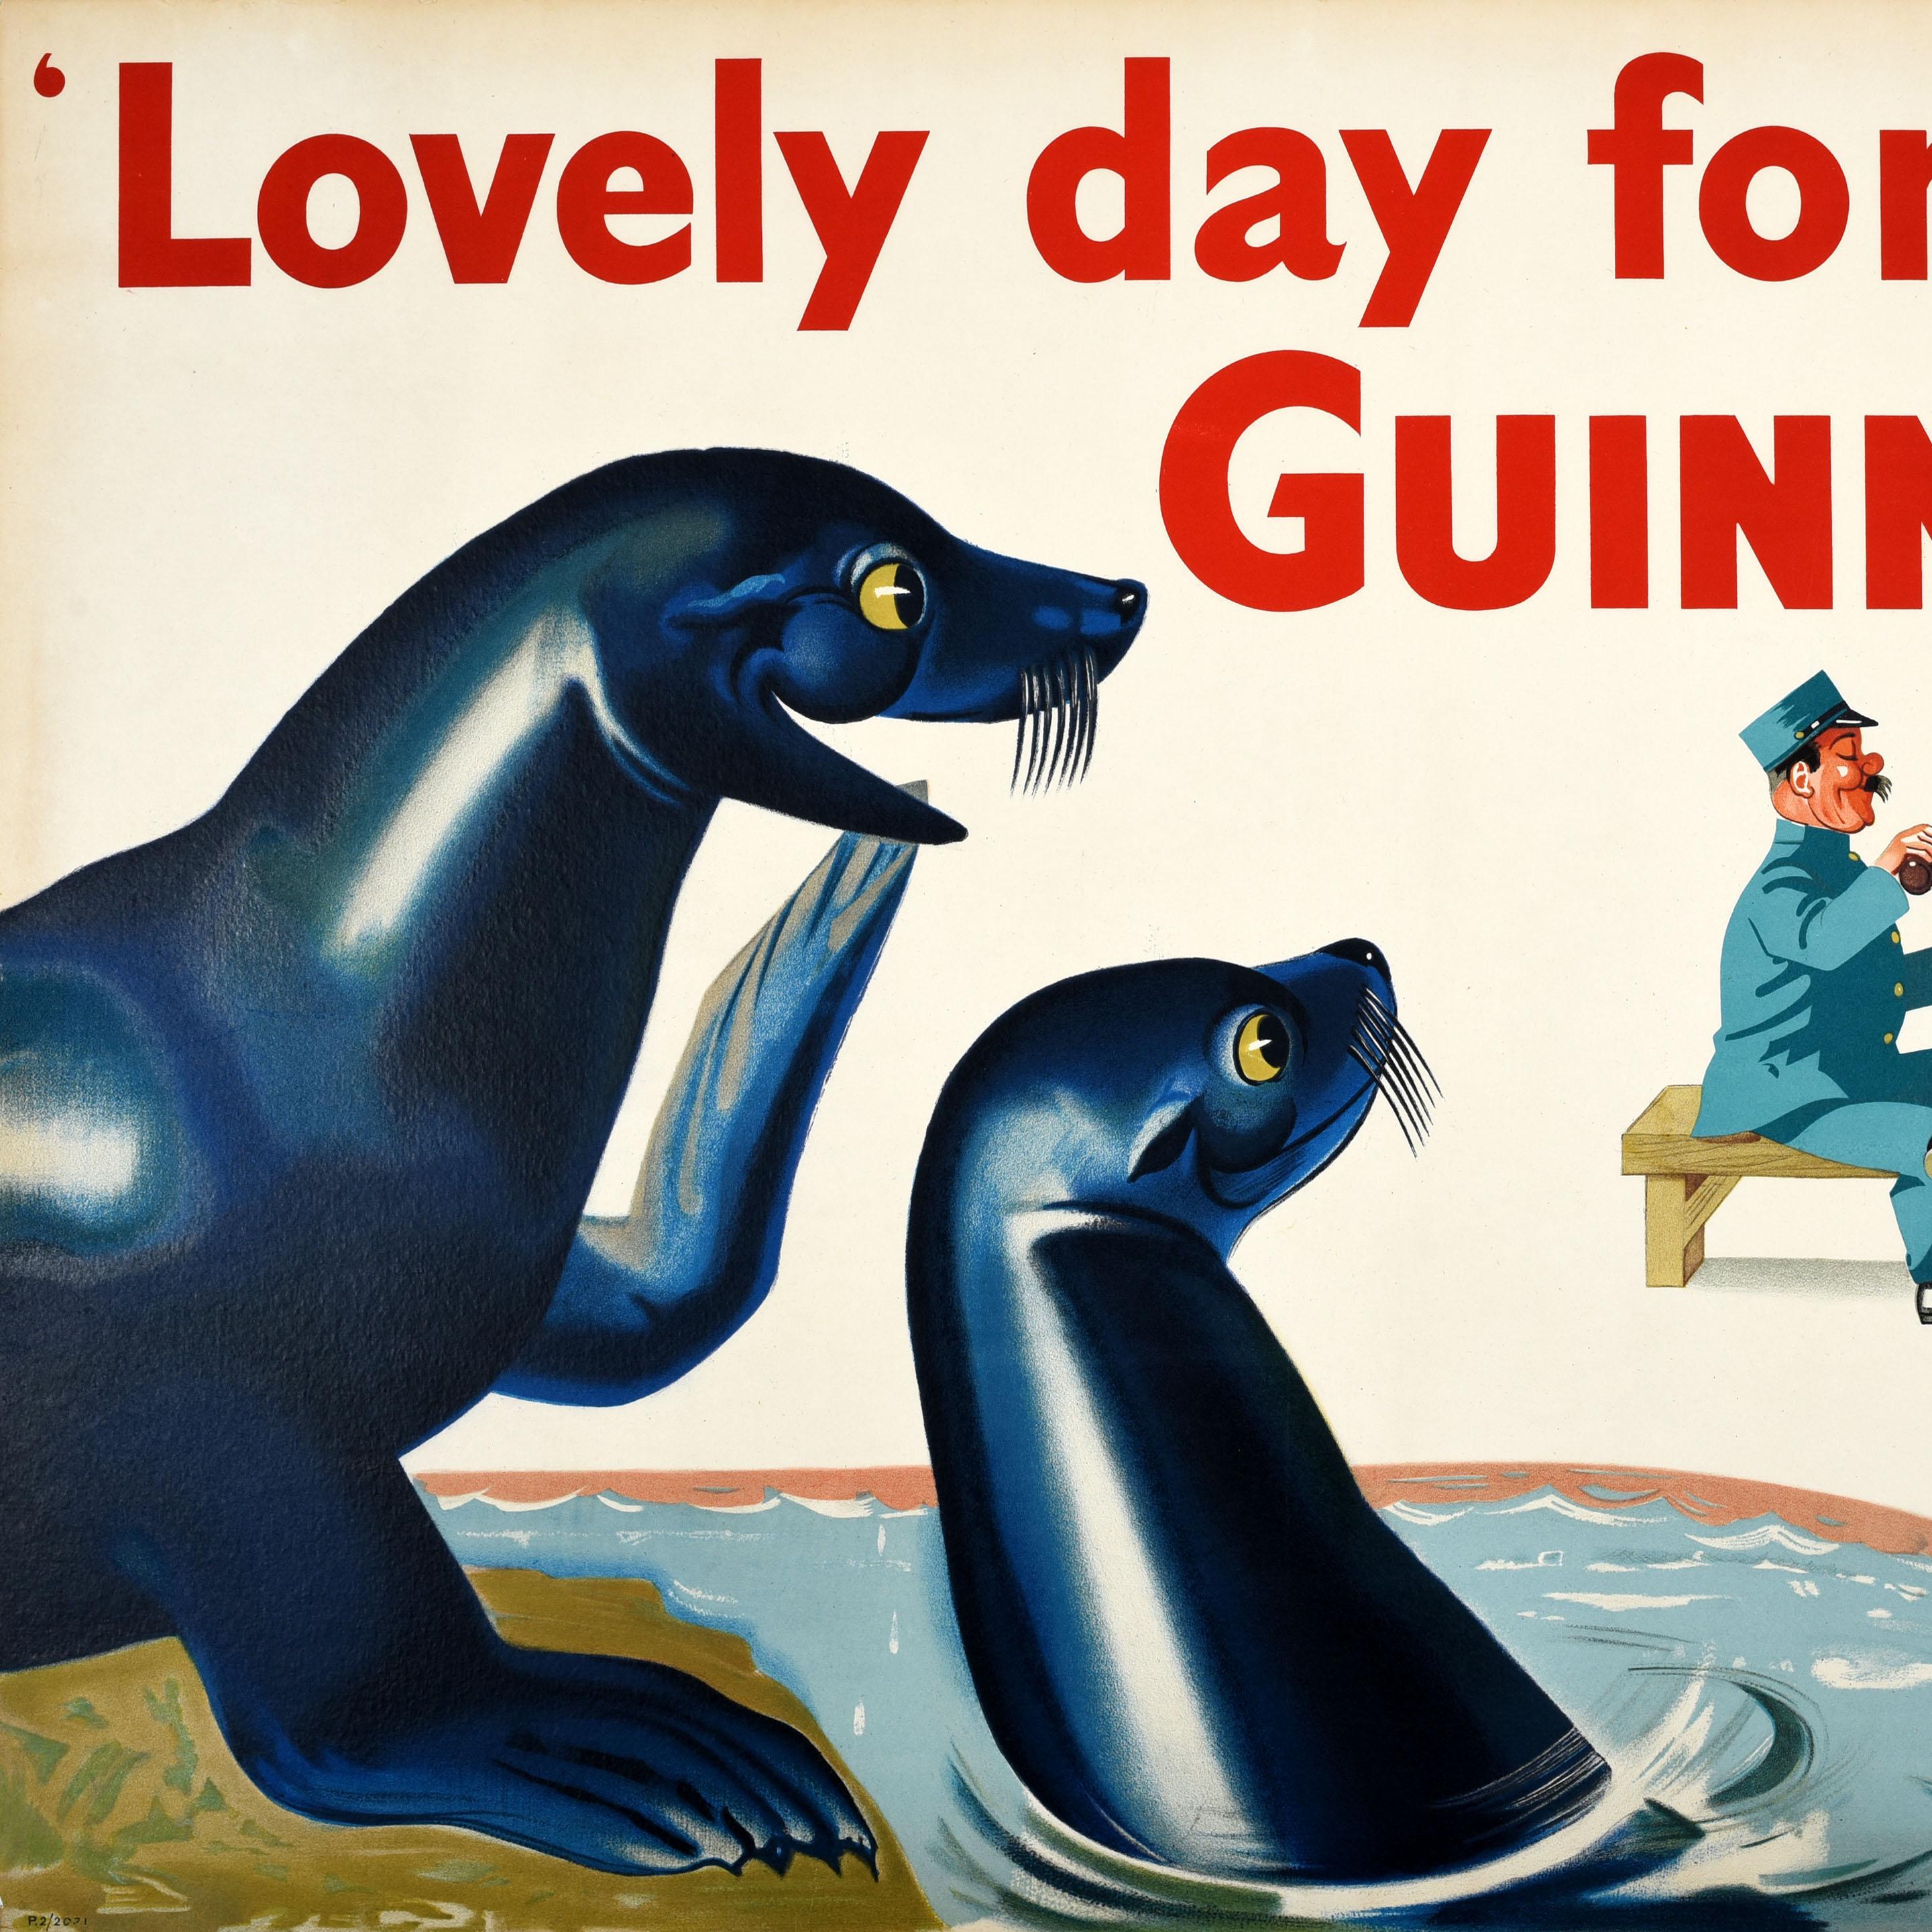 guinness stout advertisement in malaysia in 1968